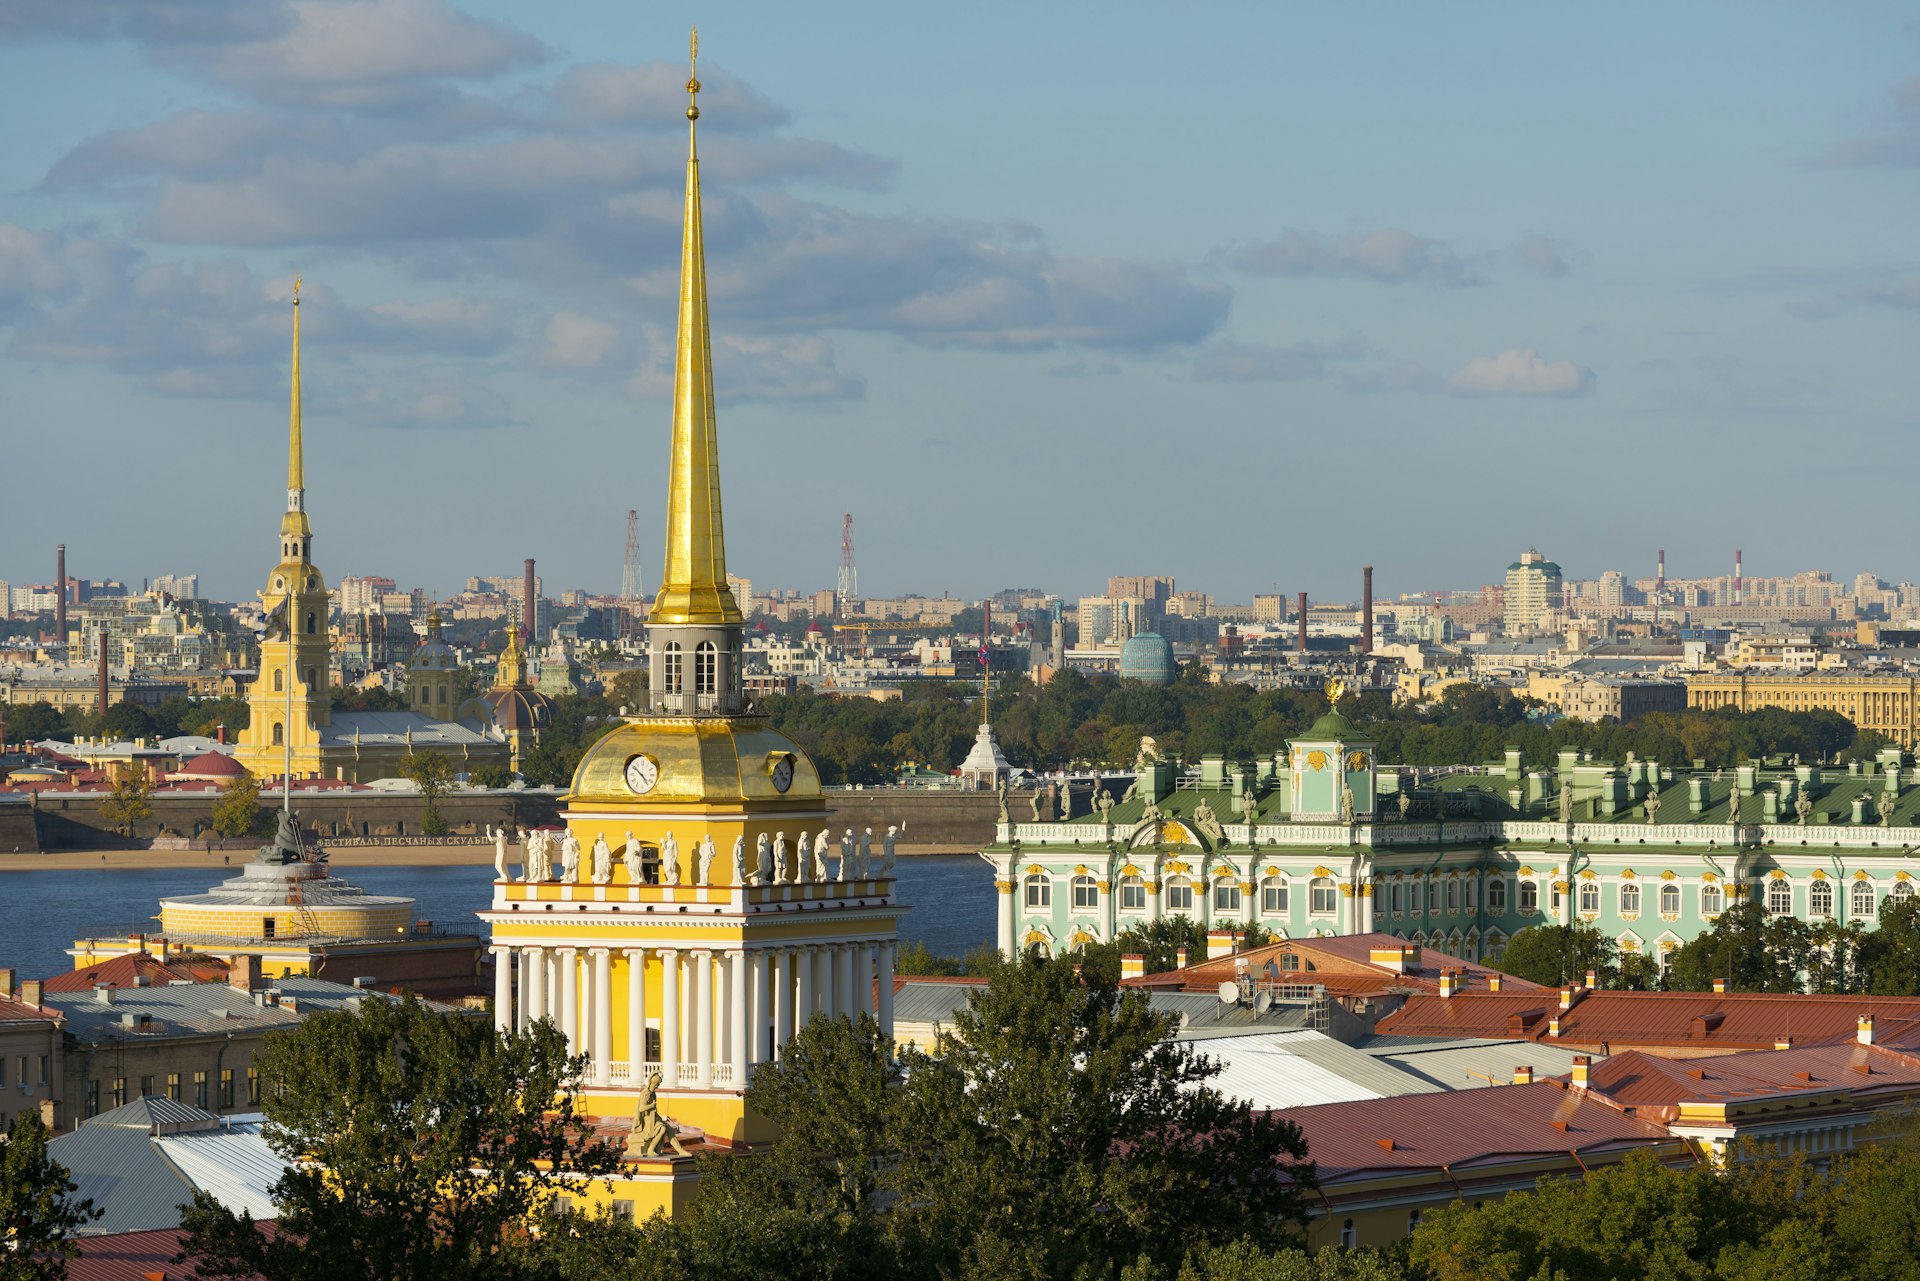 An aerial view of St Petersburg's landmark architecture, with golden spires and ornate facades visible beneath a blue sky